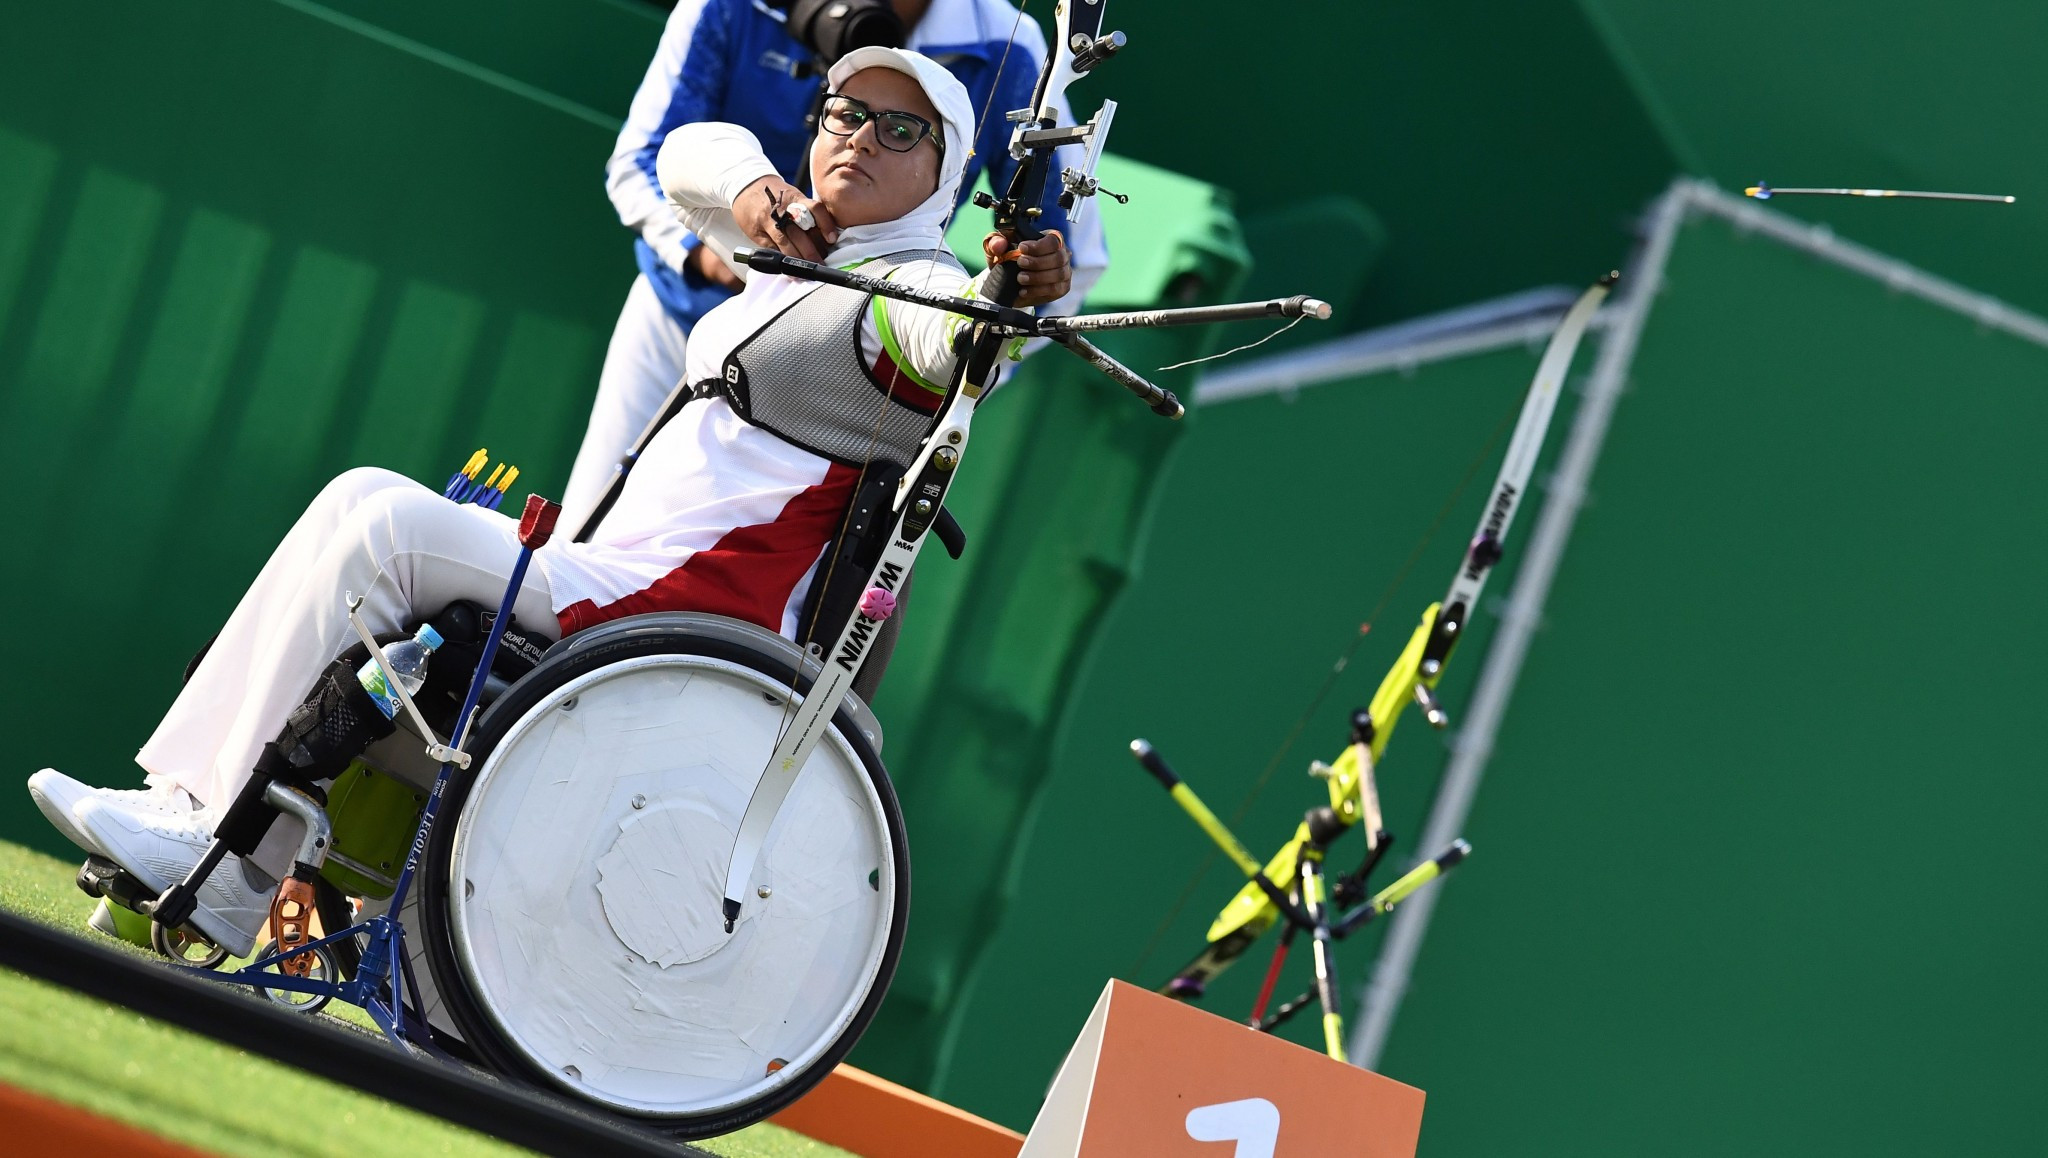 Rio 2016 gold medallists poised for World Archery Para Championships